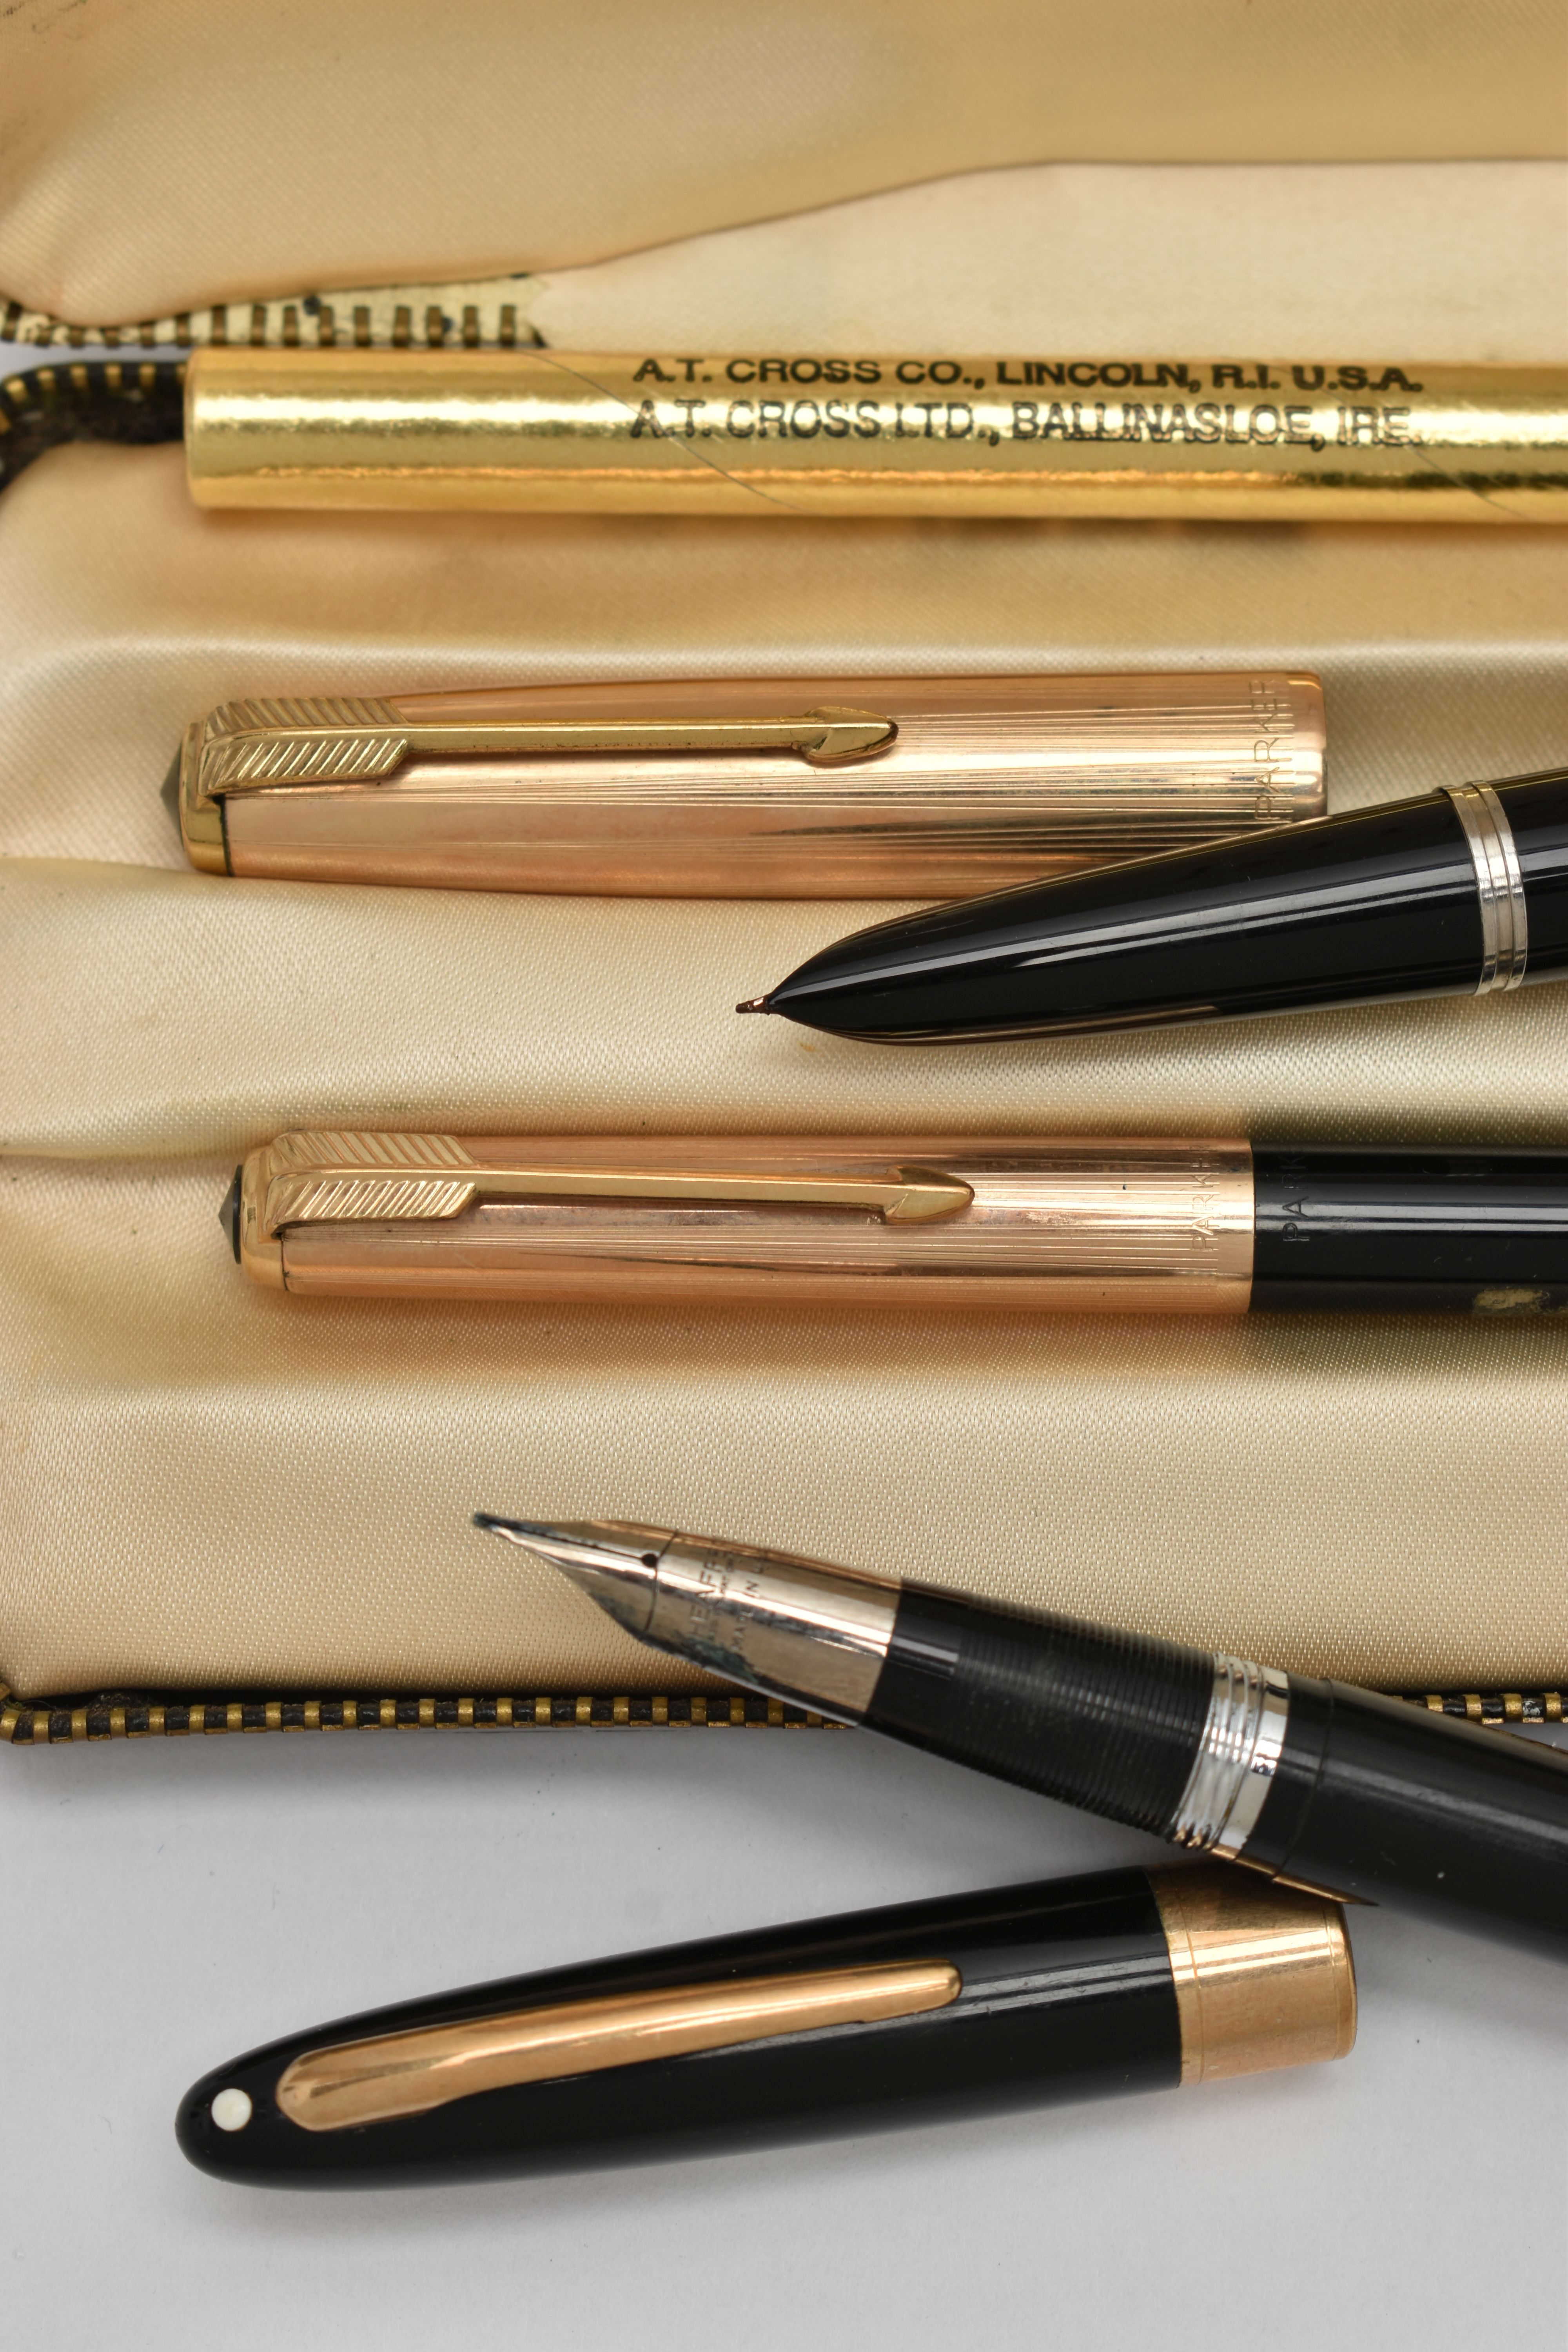 A CASED 'PARKER' SET AND A SHEAFFER PEN, a matching fountain pen and pencil set signed 'Parker' - Image 2 of 3